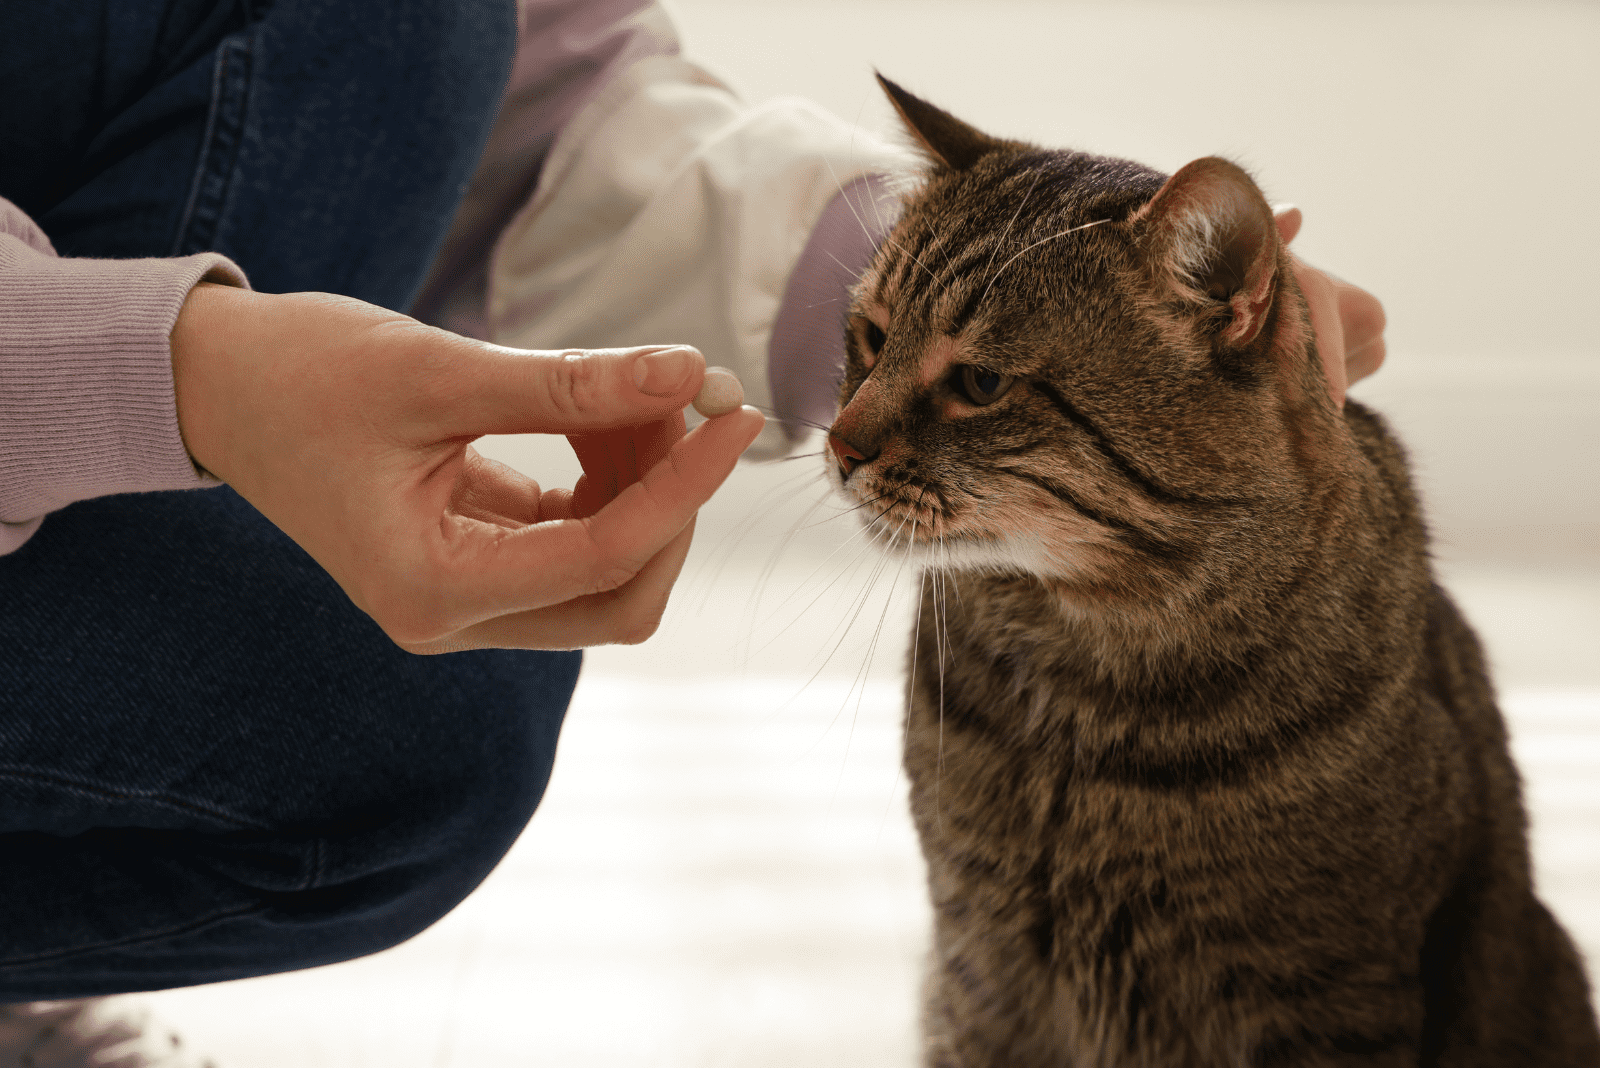 the woman gives medicine to the cat from her hand